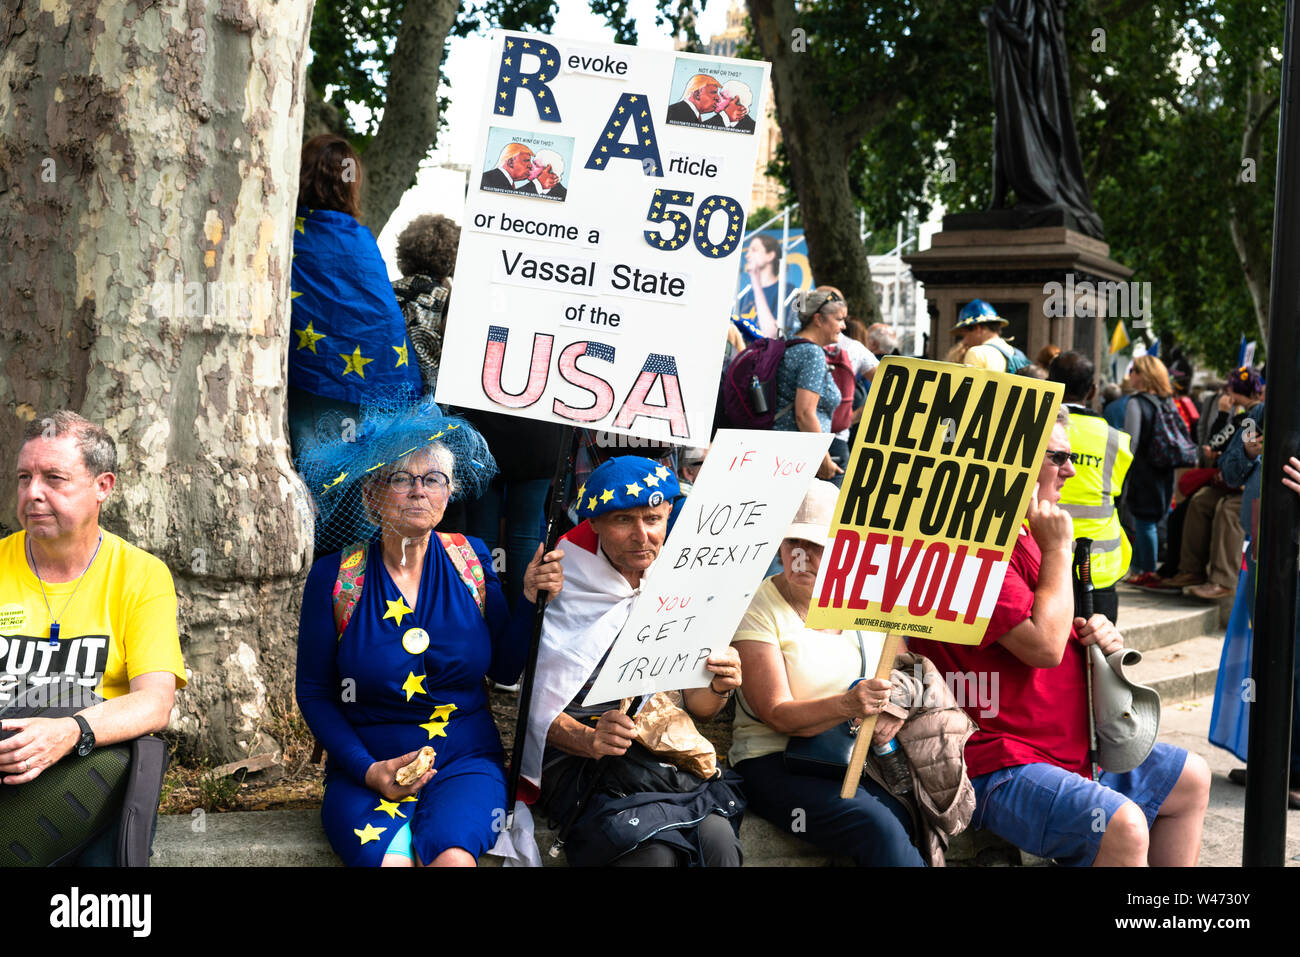 London, UK. July 20th 2019: Anti Brexit protesters gather in Parliament Square following a march through London. It has been estimated that 1 million people attended from all regions in the country Credit: Bridget Catterall/Alamy Live News Credit: Bridget Catterall/Alamy Live News Stock Photo